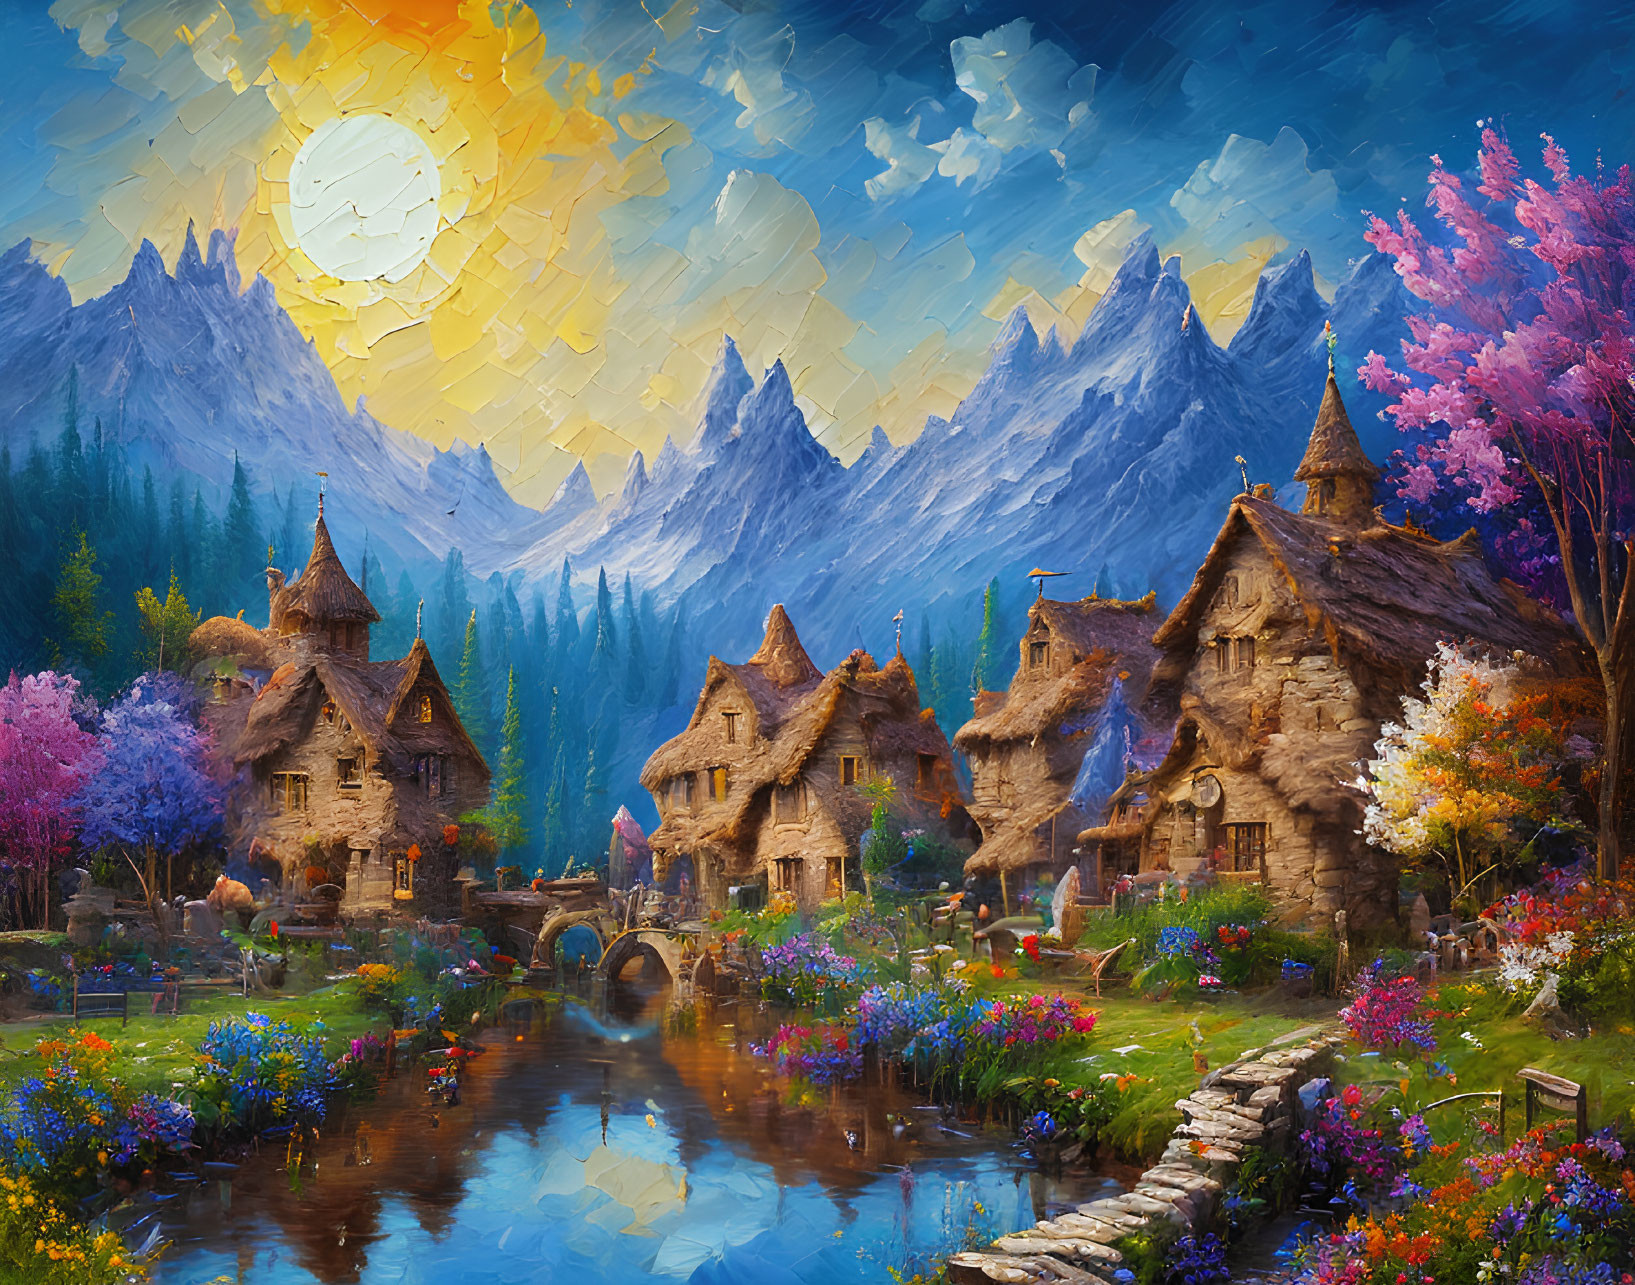 Colorful Painting of Whimsical Village by River at Sunset